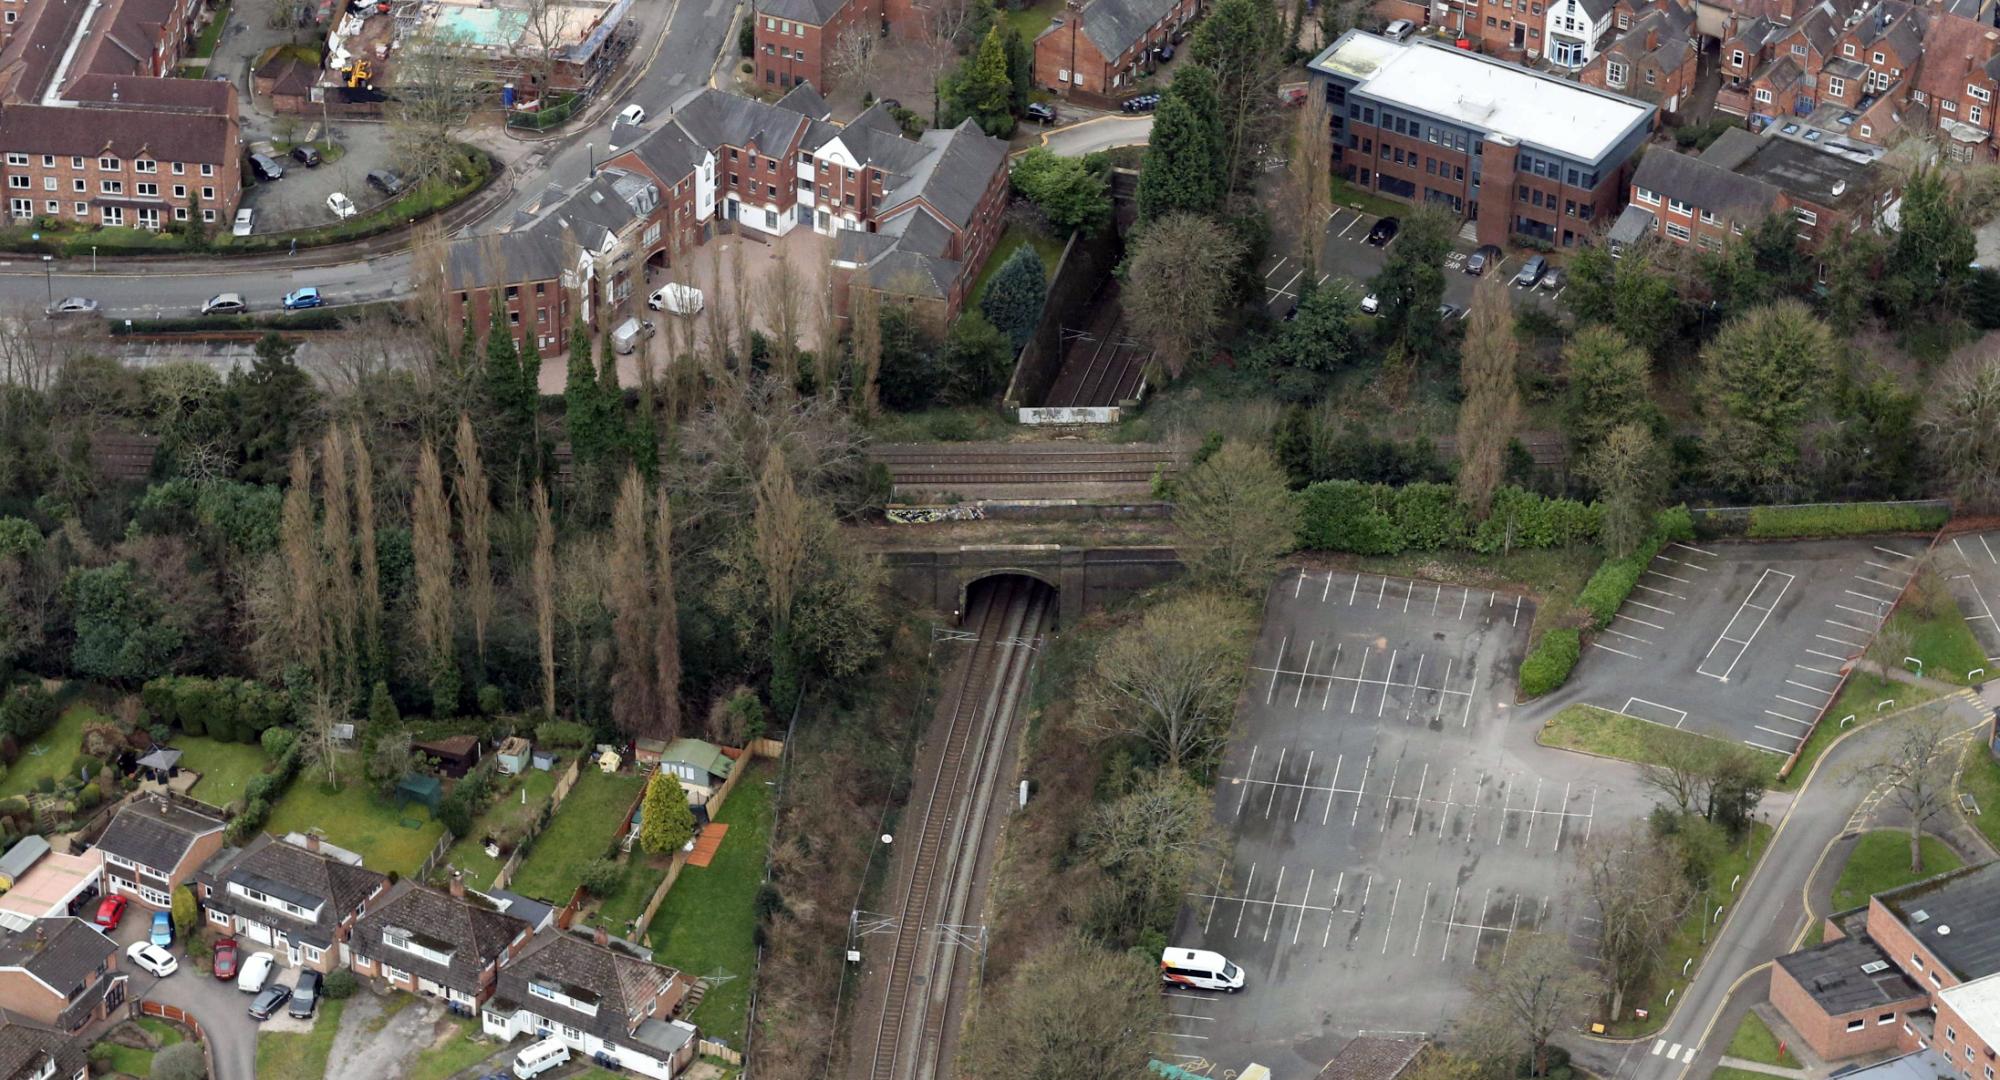 Aerial view of bridge being replaced in Sutton Coldfield - Credit Network Rail Air Operations